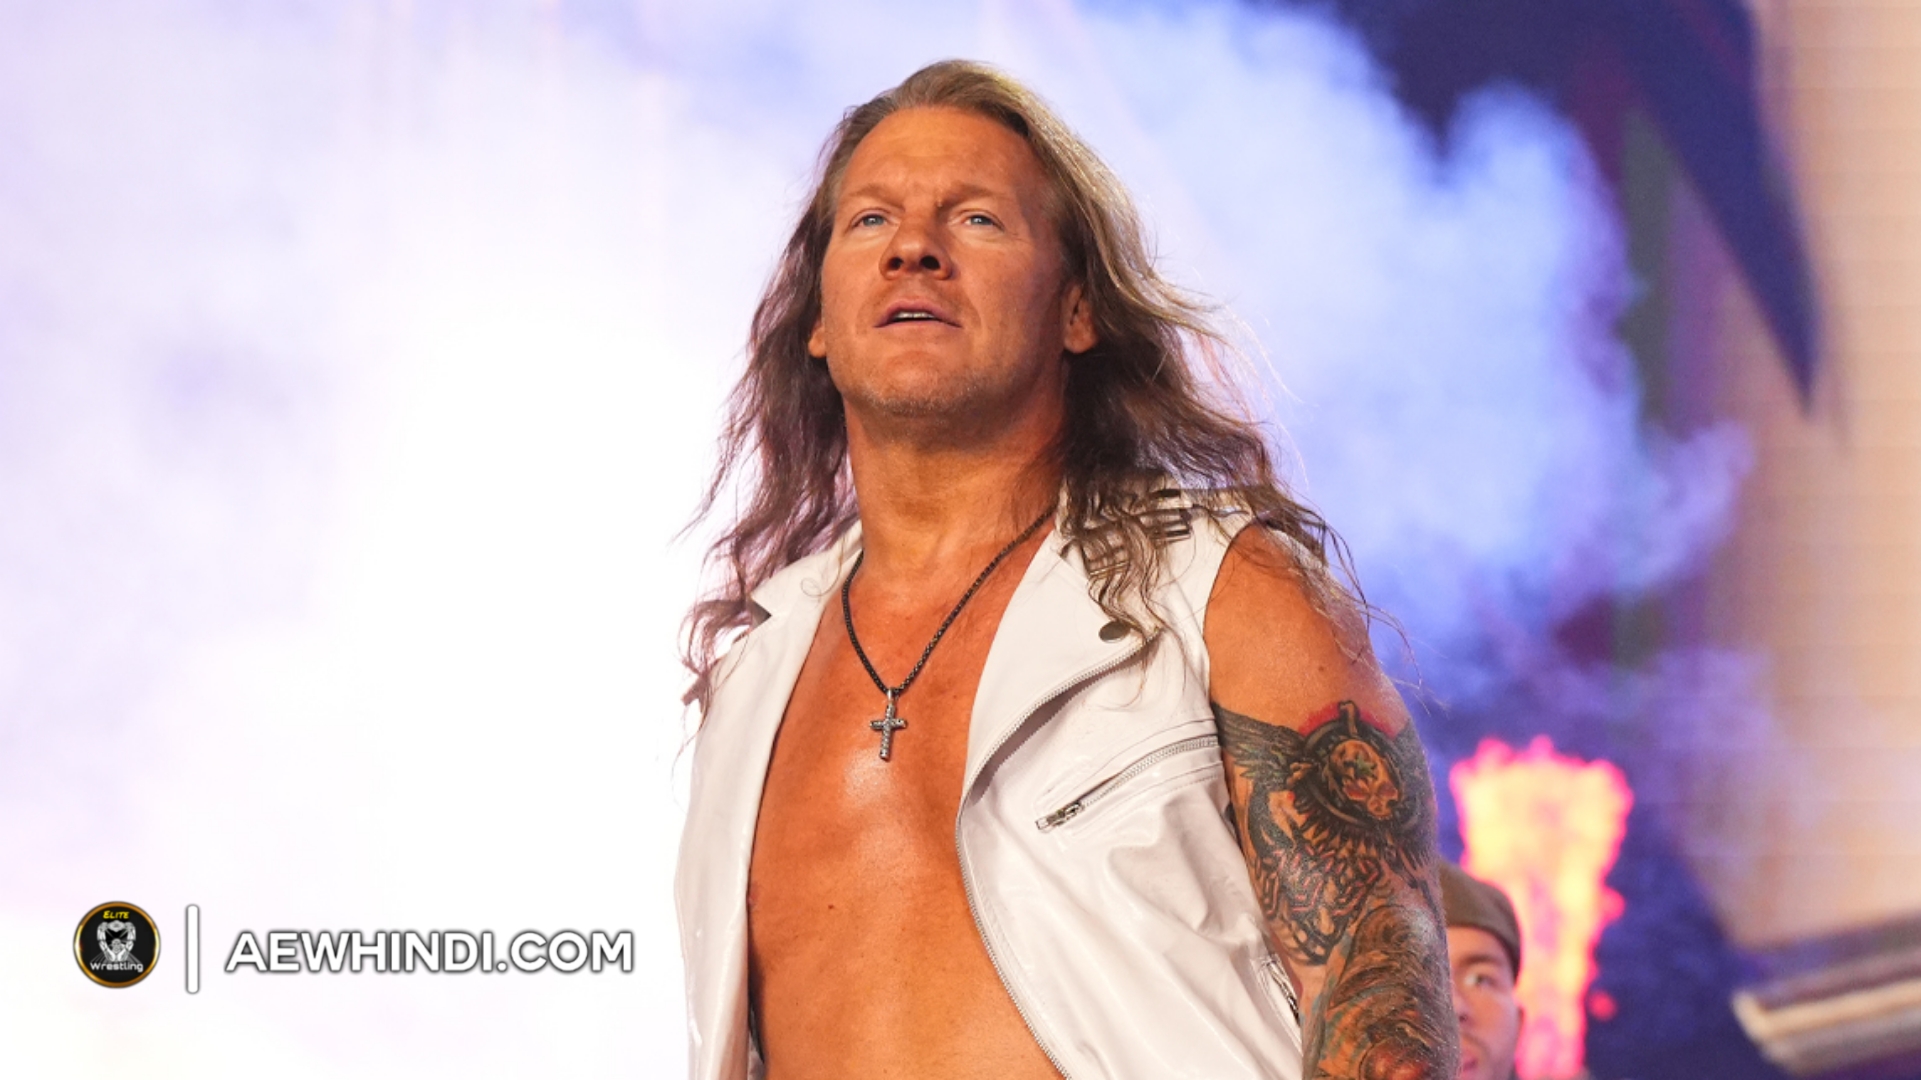 Chris Jericho Name Dragged into Sexual Assault allegations